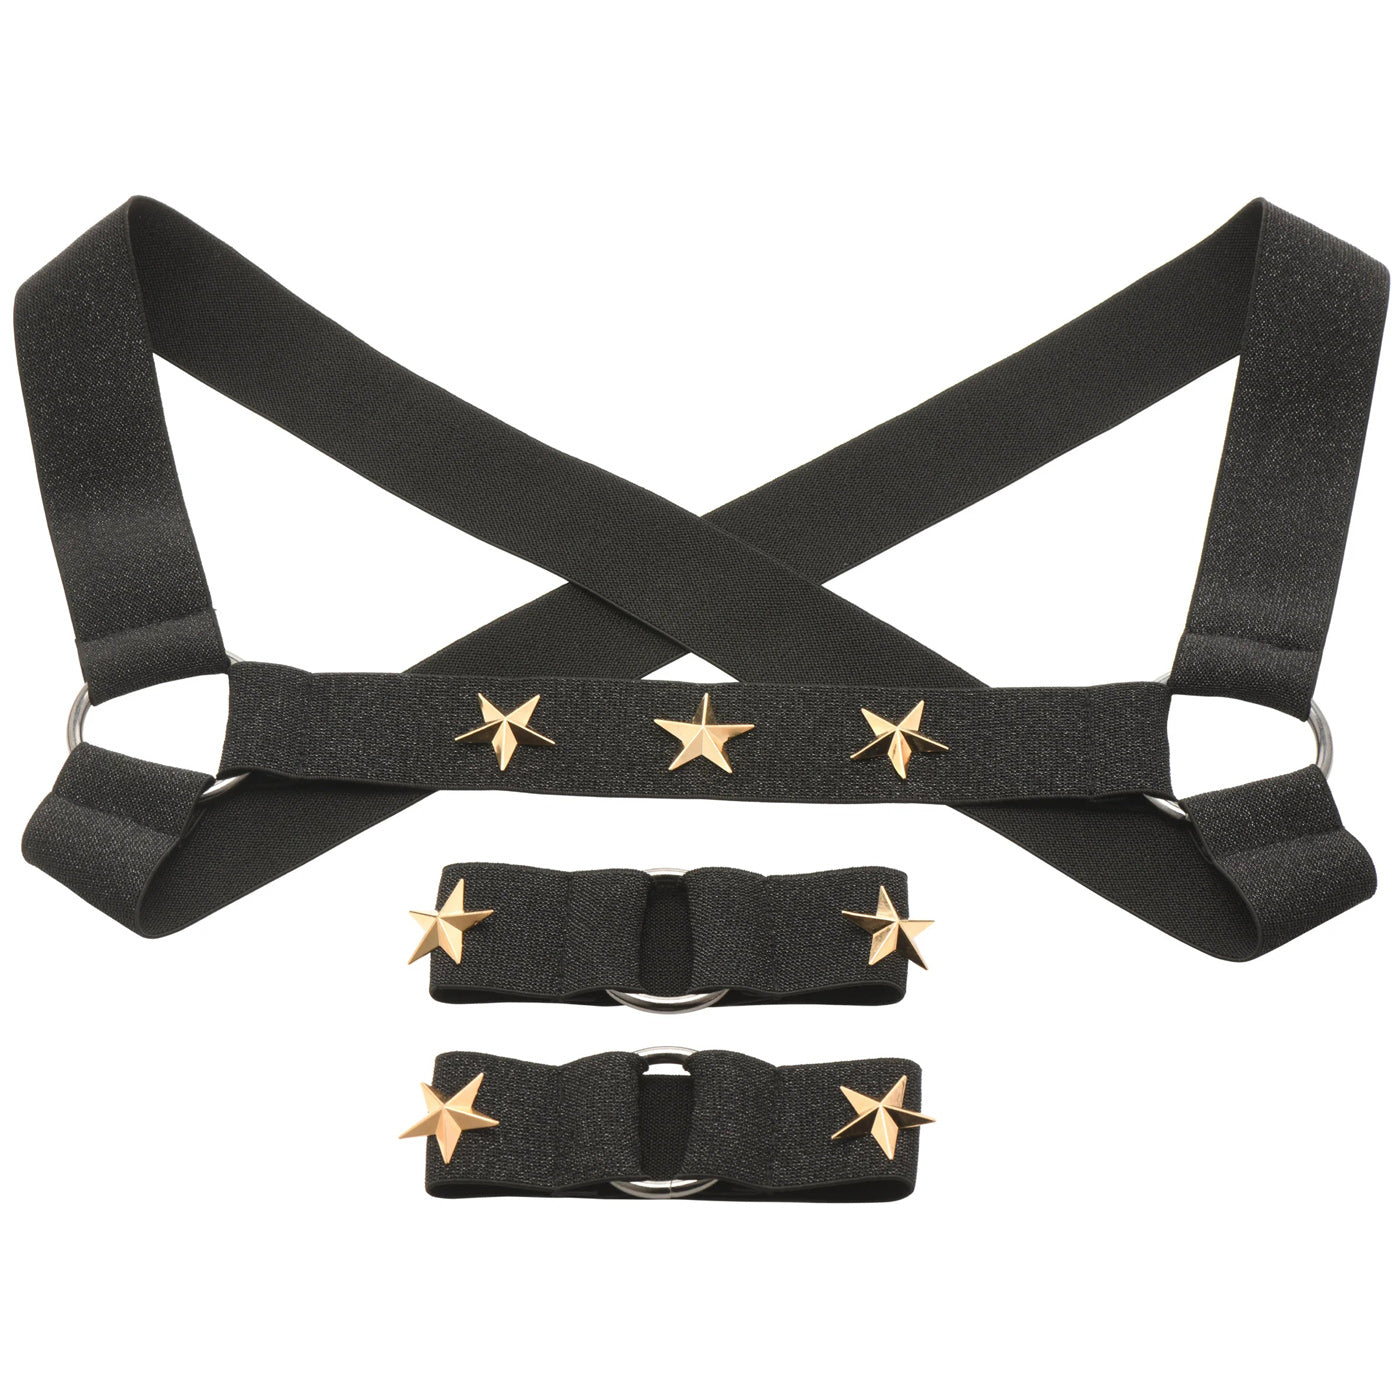 Star Boy Male Chest Harness With Arm Bands -  Small/medium - Black-4